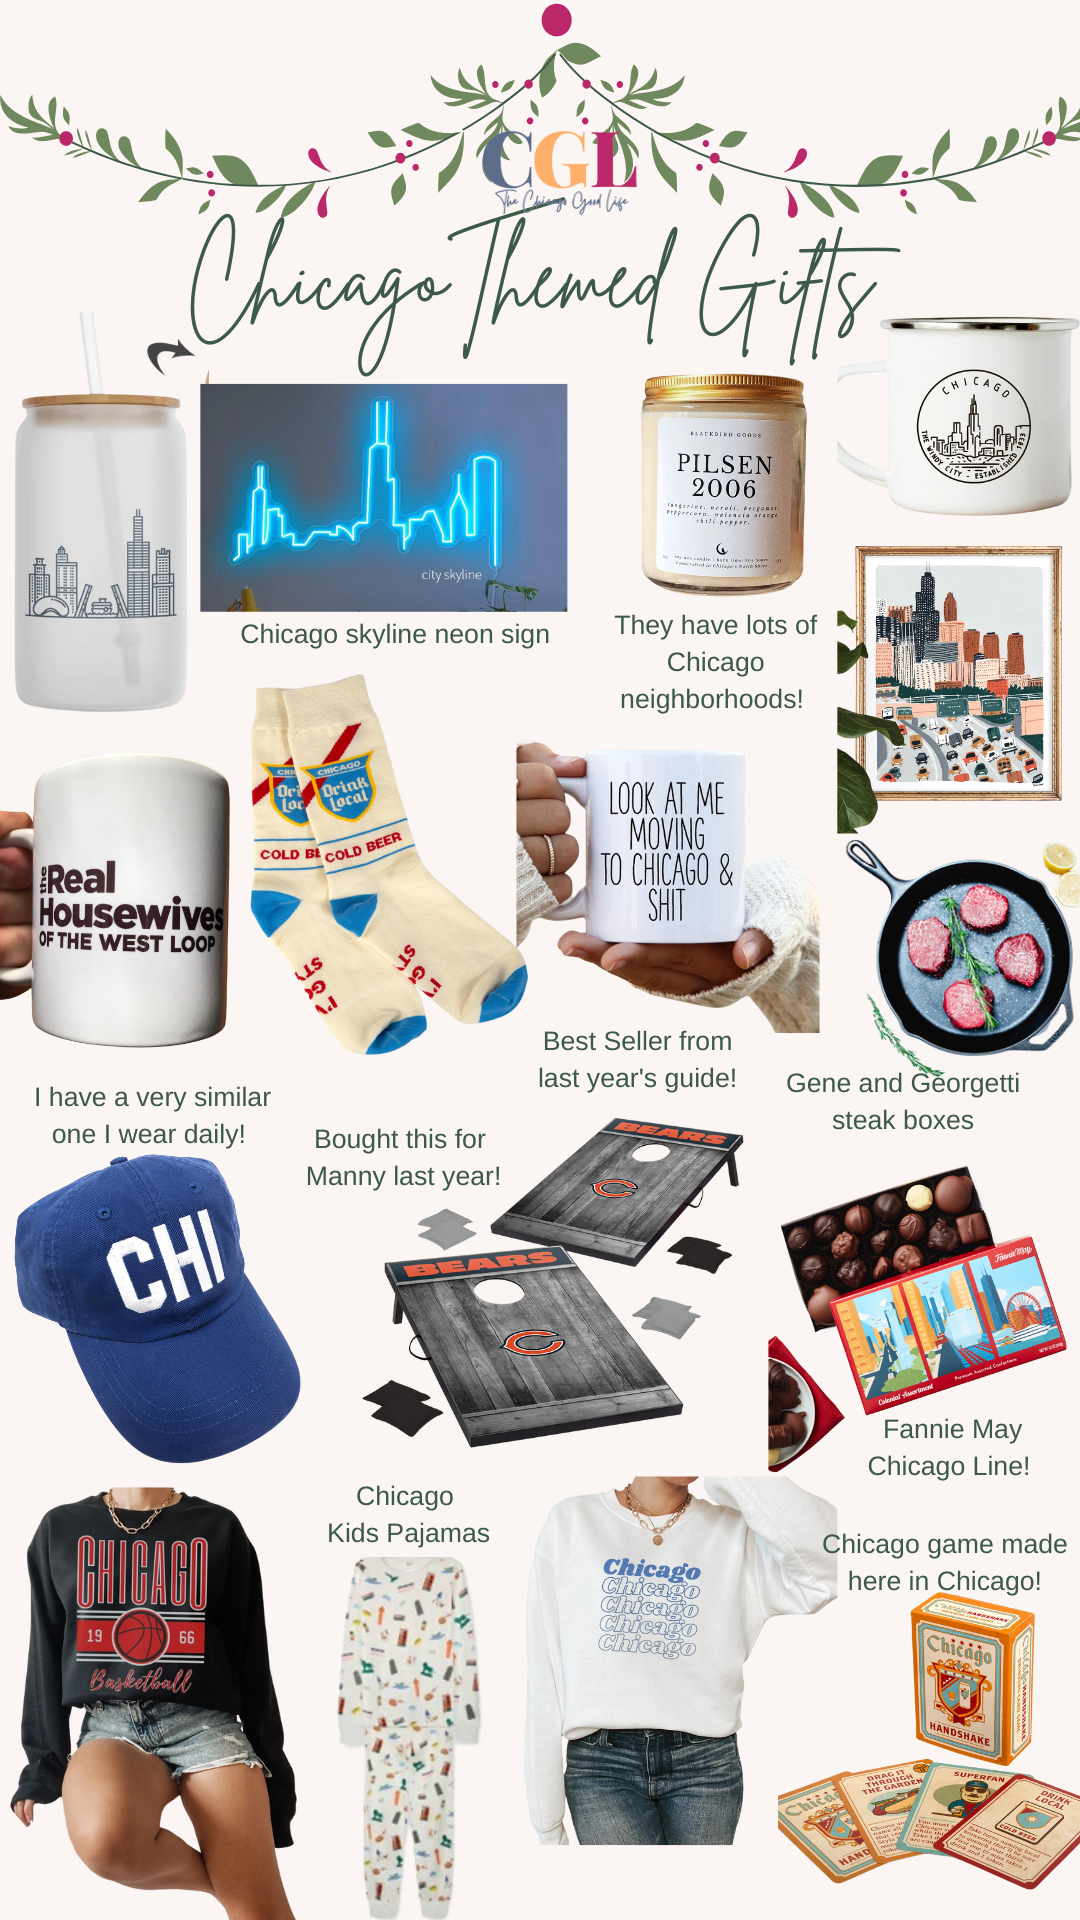 Chicago-Themed Gift Guide